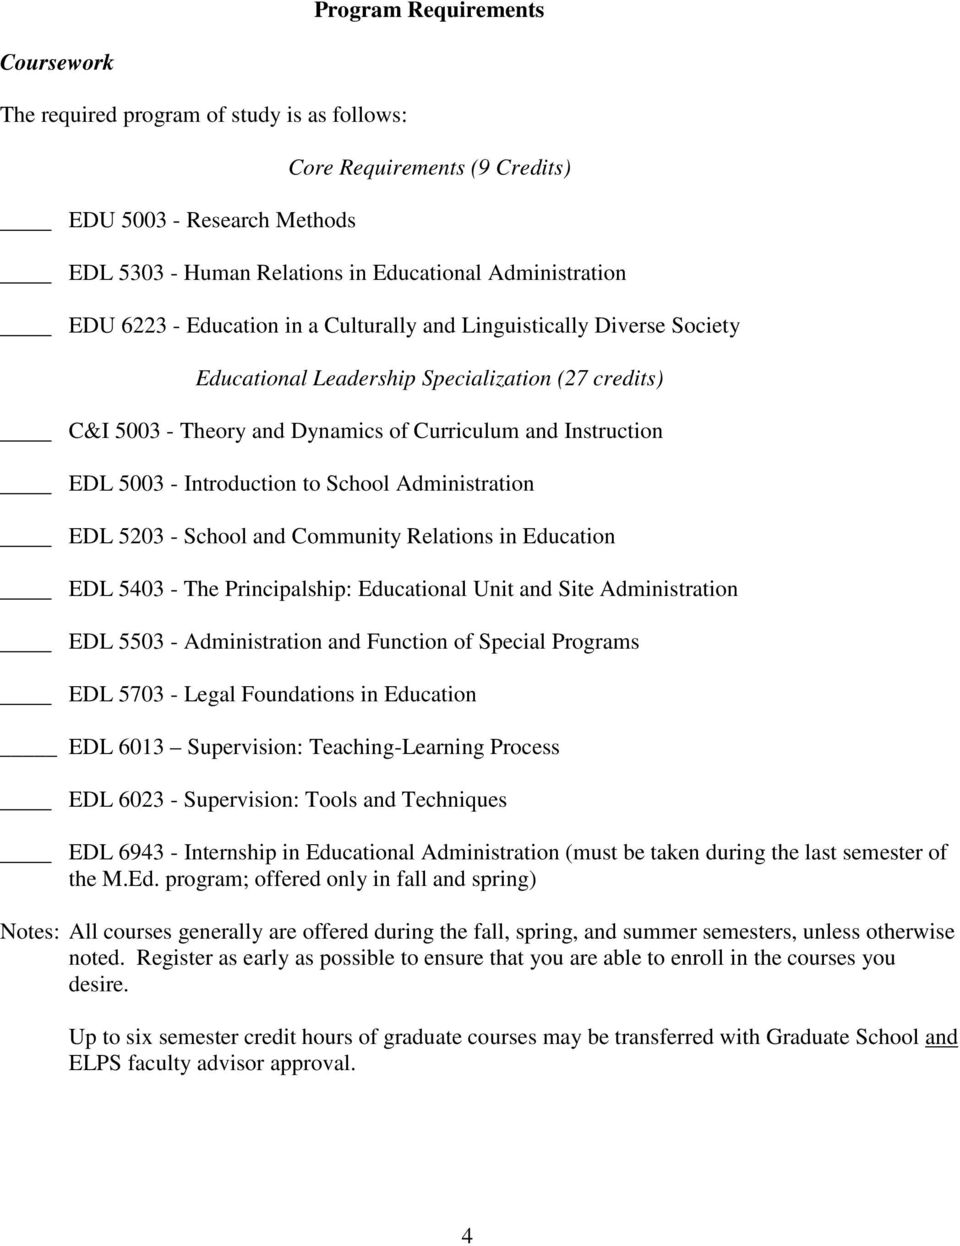 Introduction to School Administration EDL 5203 - School and Community Relations in Education EDL 5403 - The Principalship: Educational Unit and Site Administration EDL 5503 - Administration and